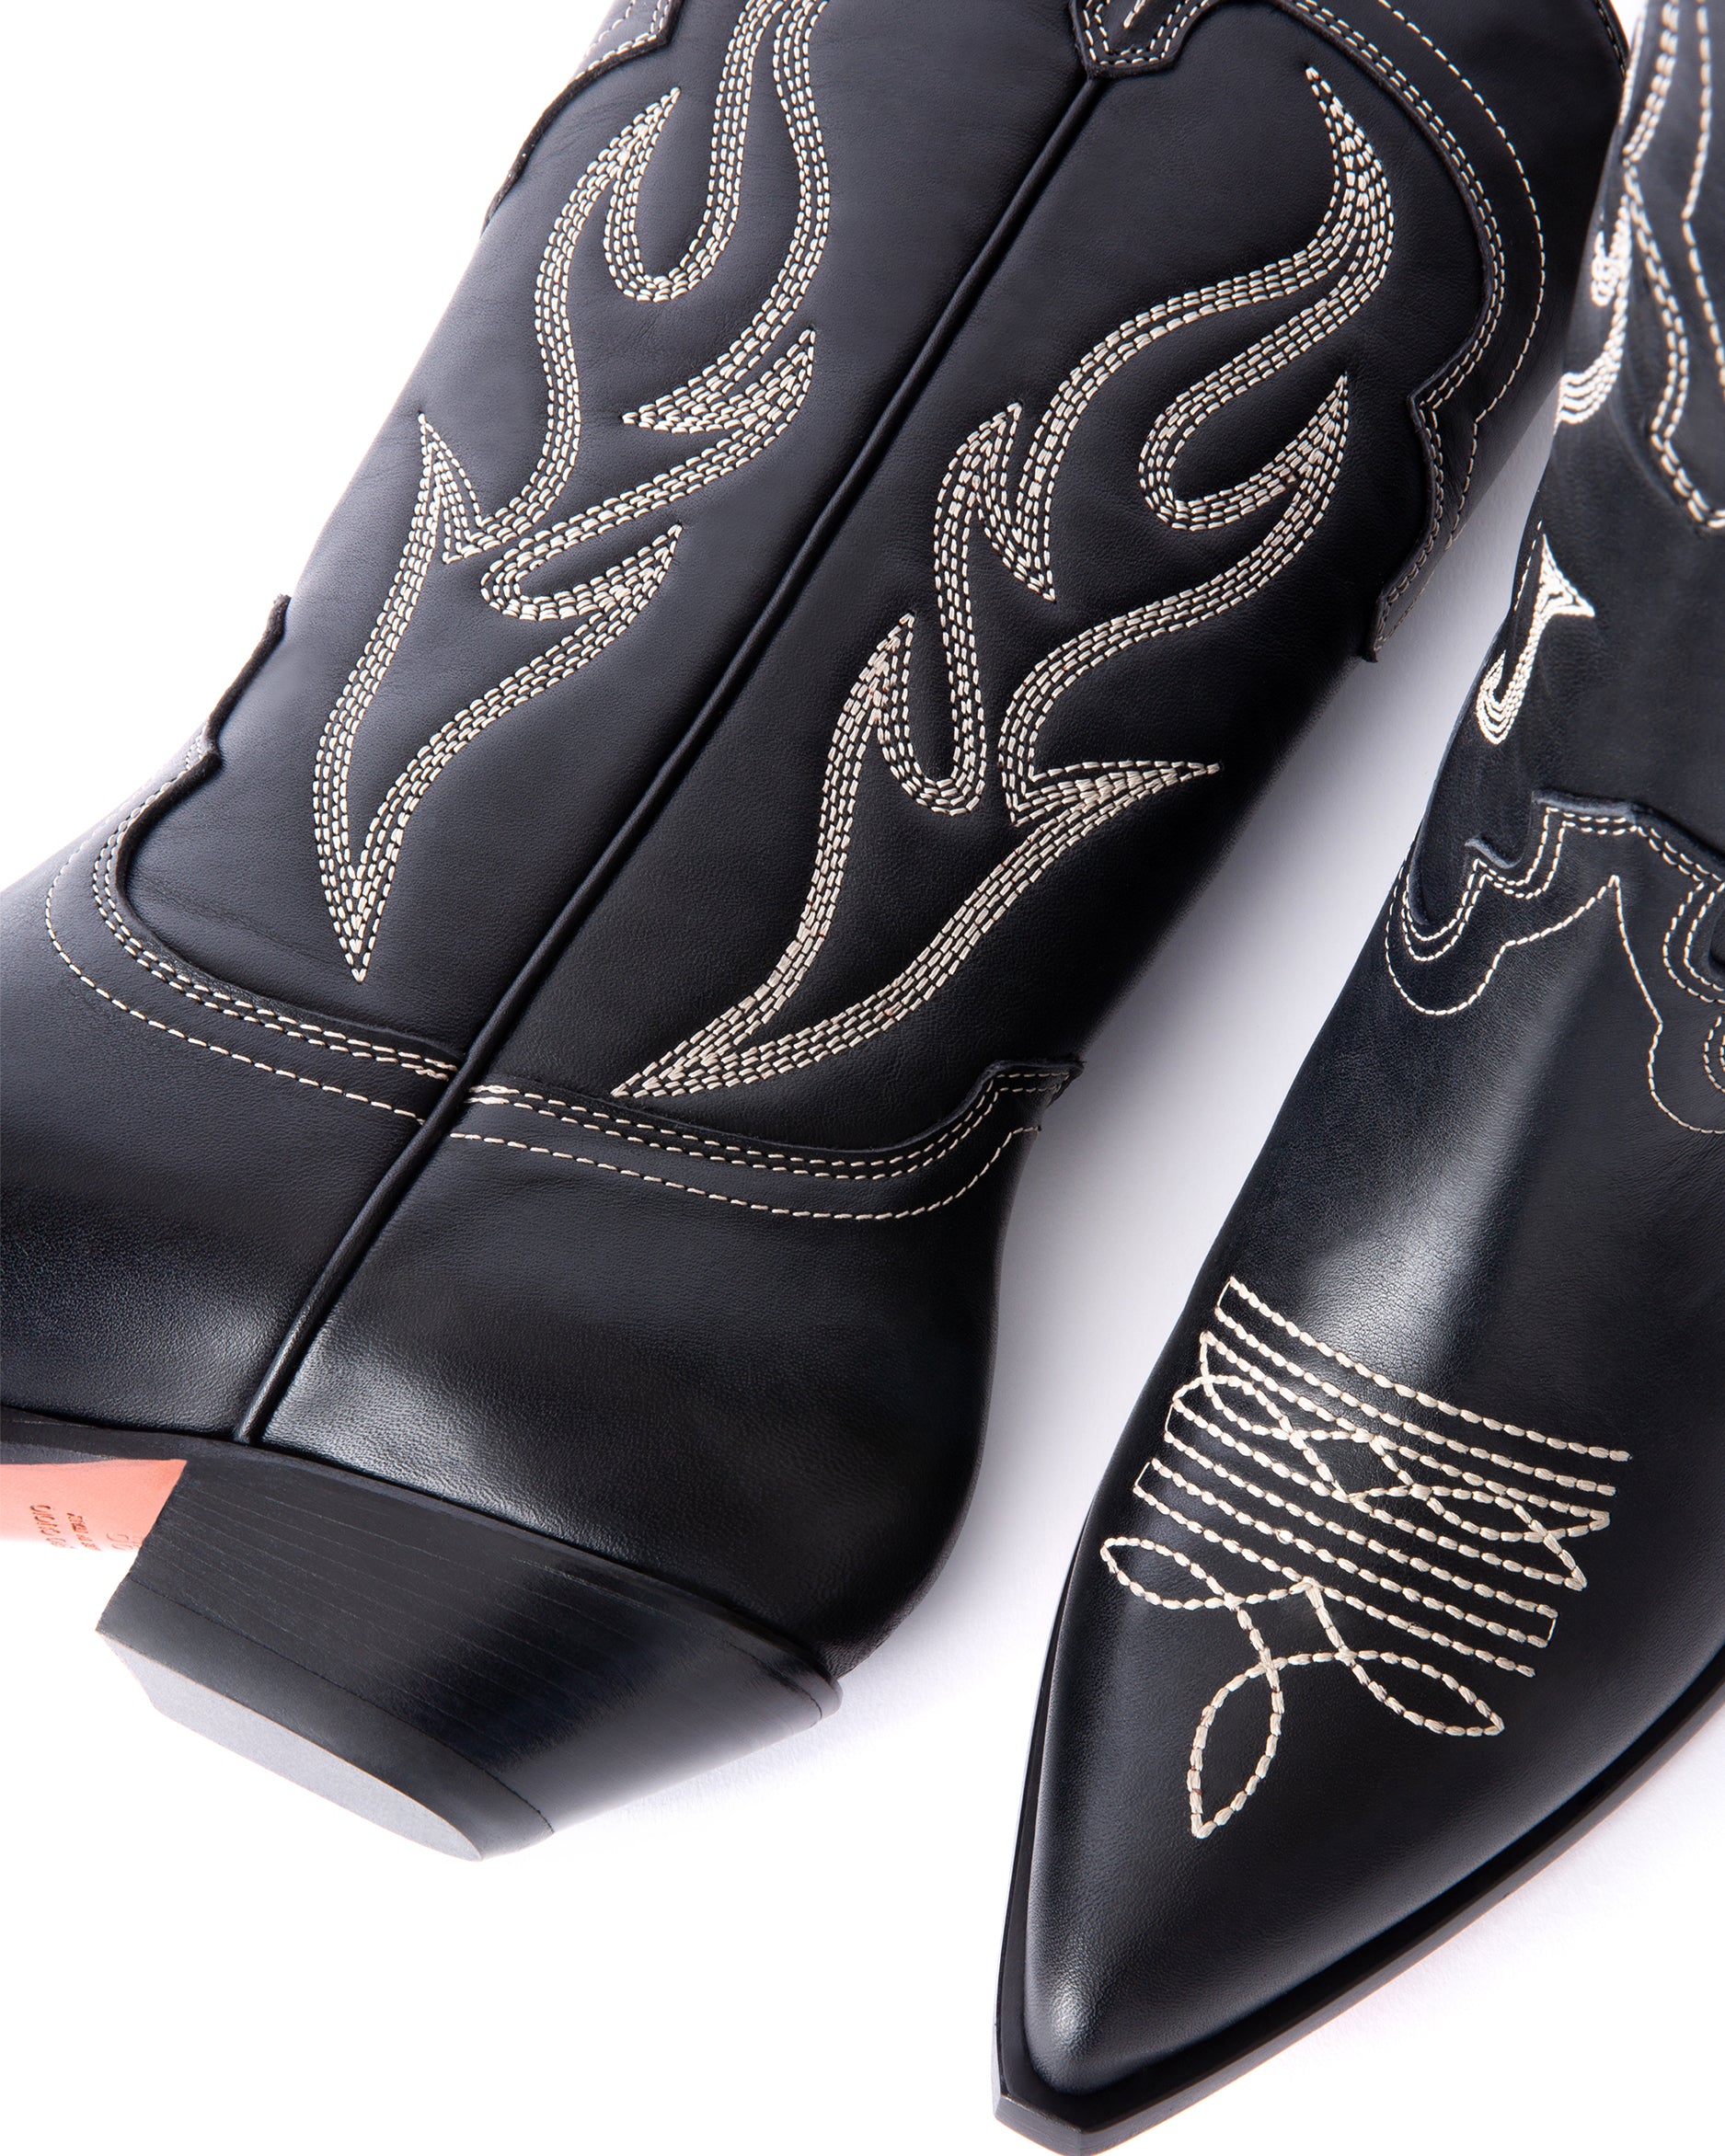 Santafe Men's Cowboy Boots in Black Calfskin | Off-White Embroidery 03